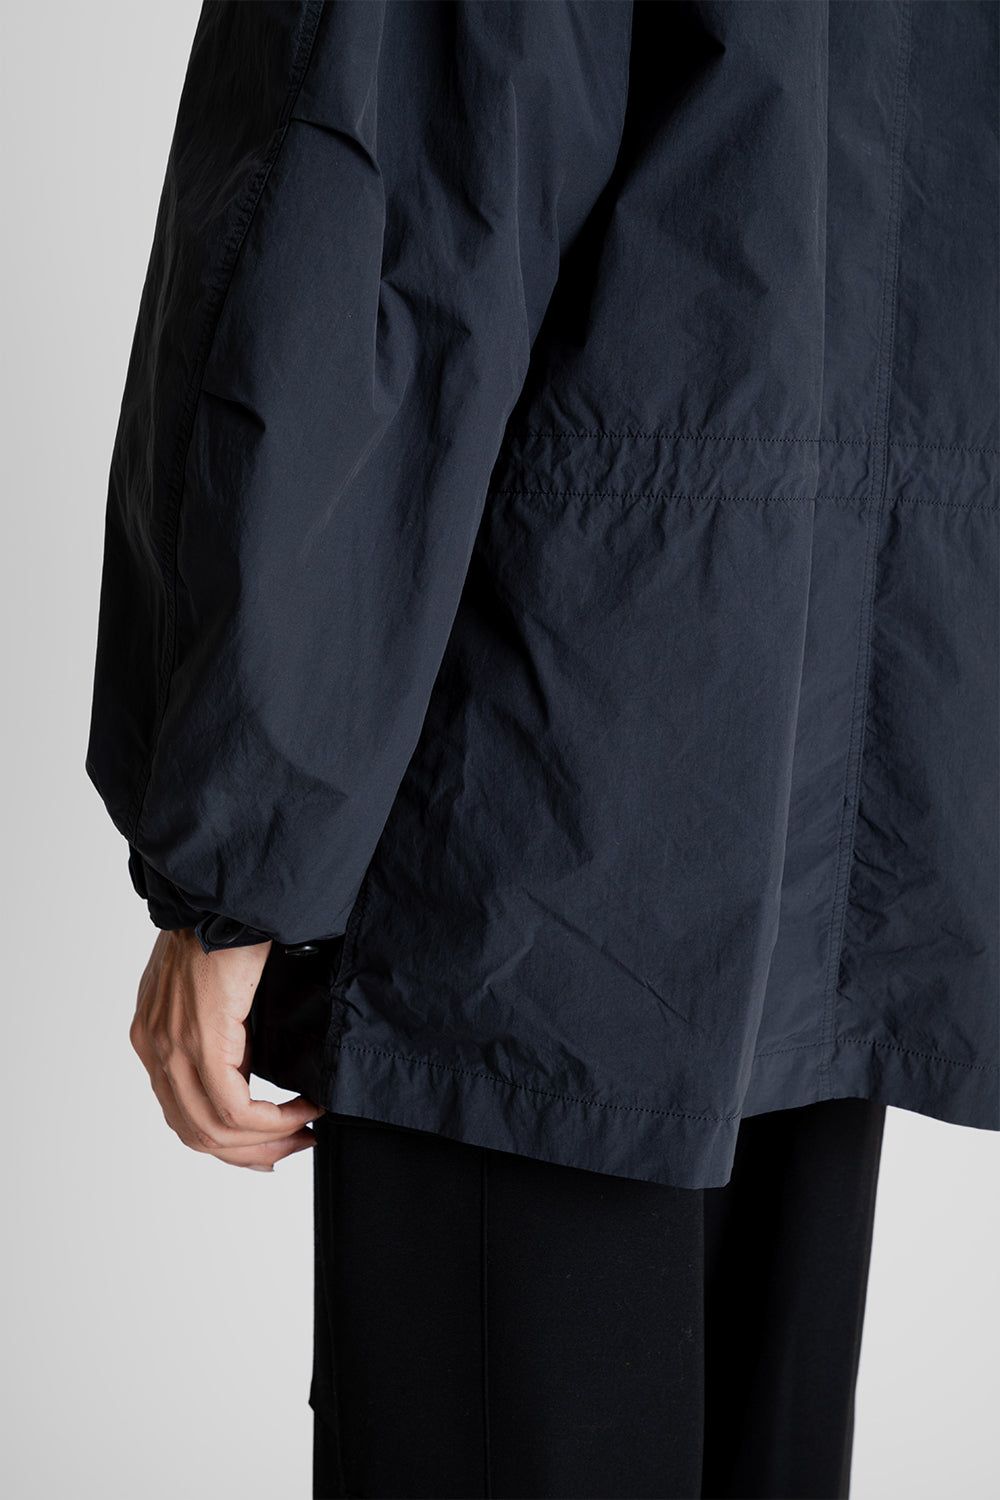 Air Weather Short Mods Coat - Charcoal Grey